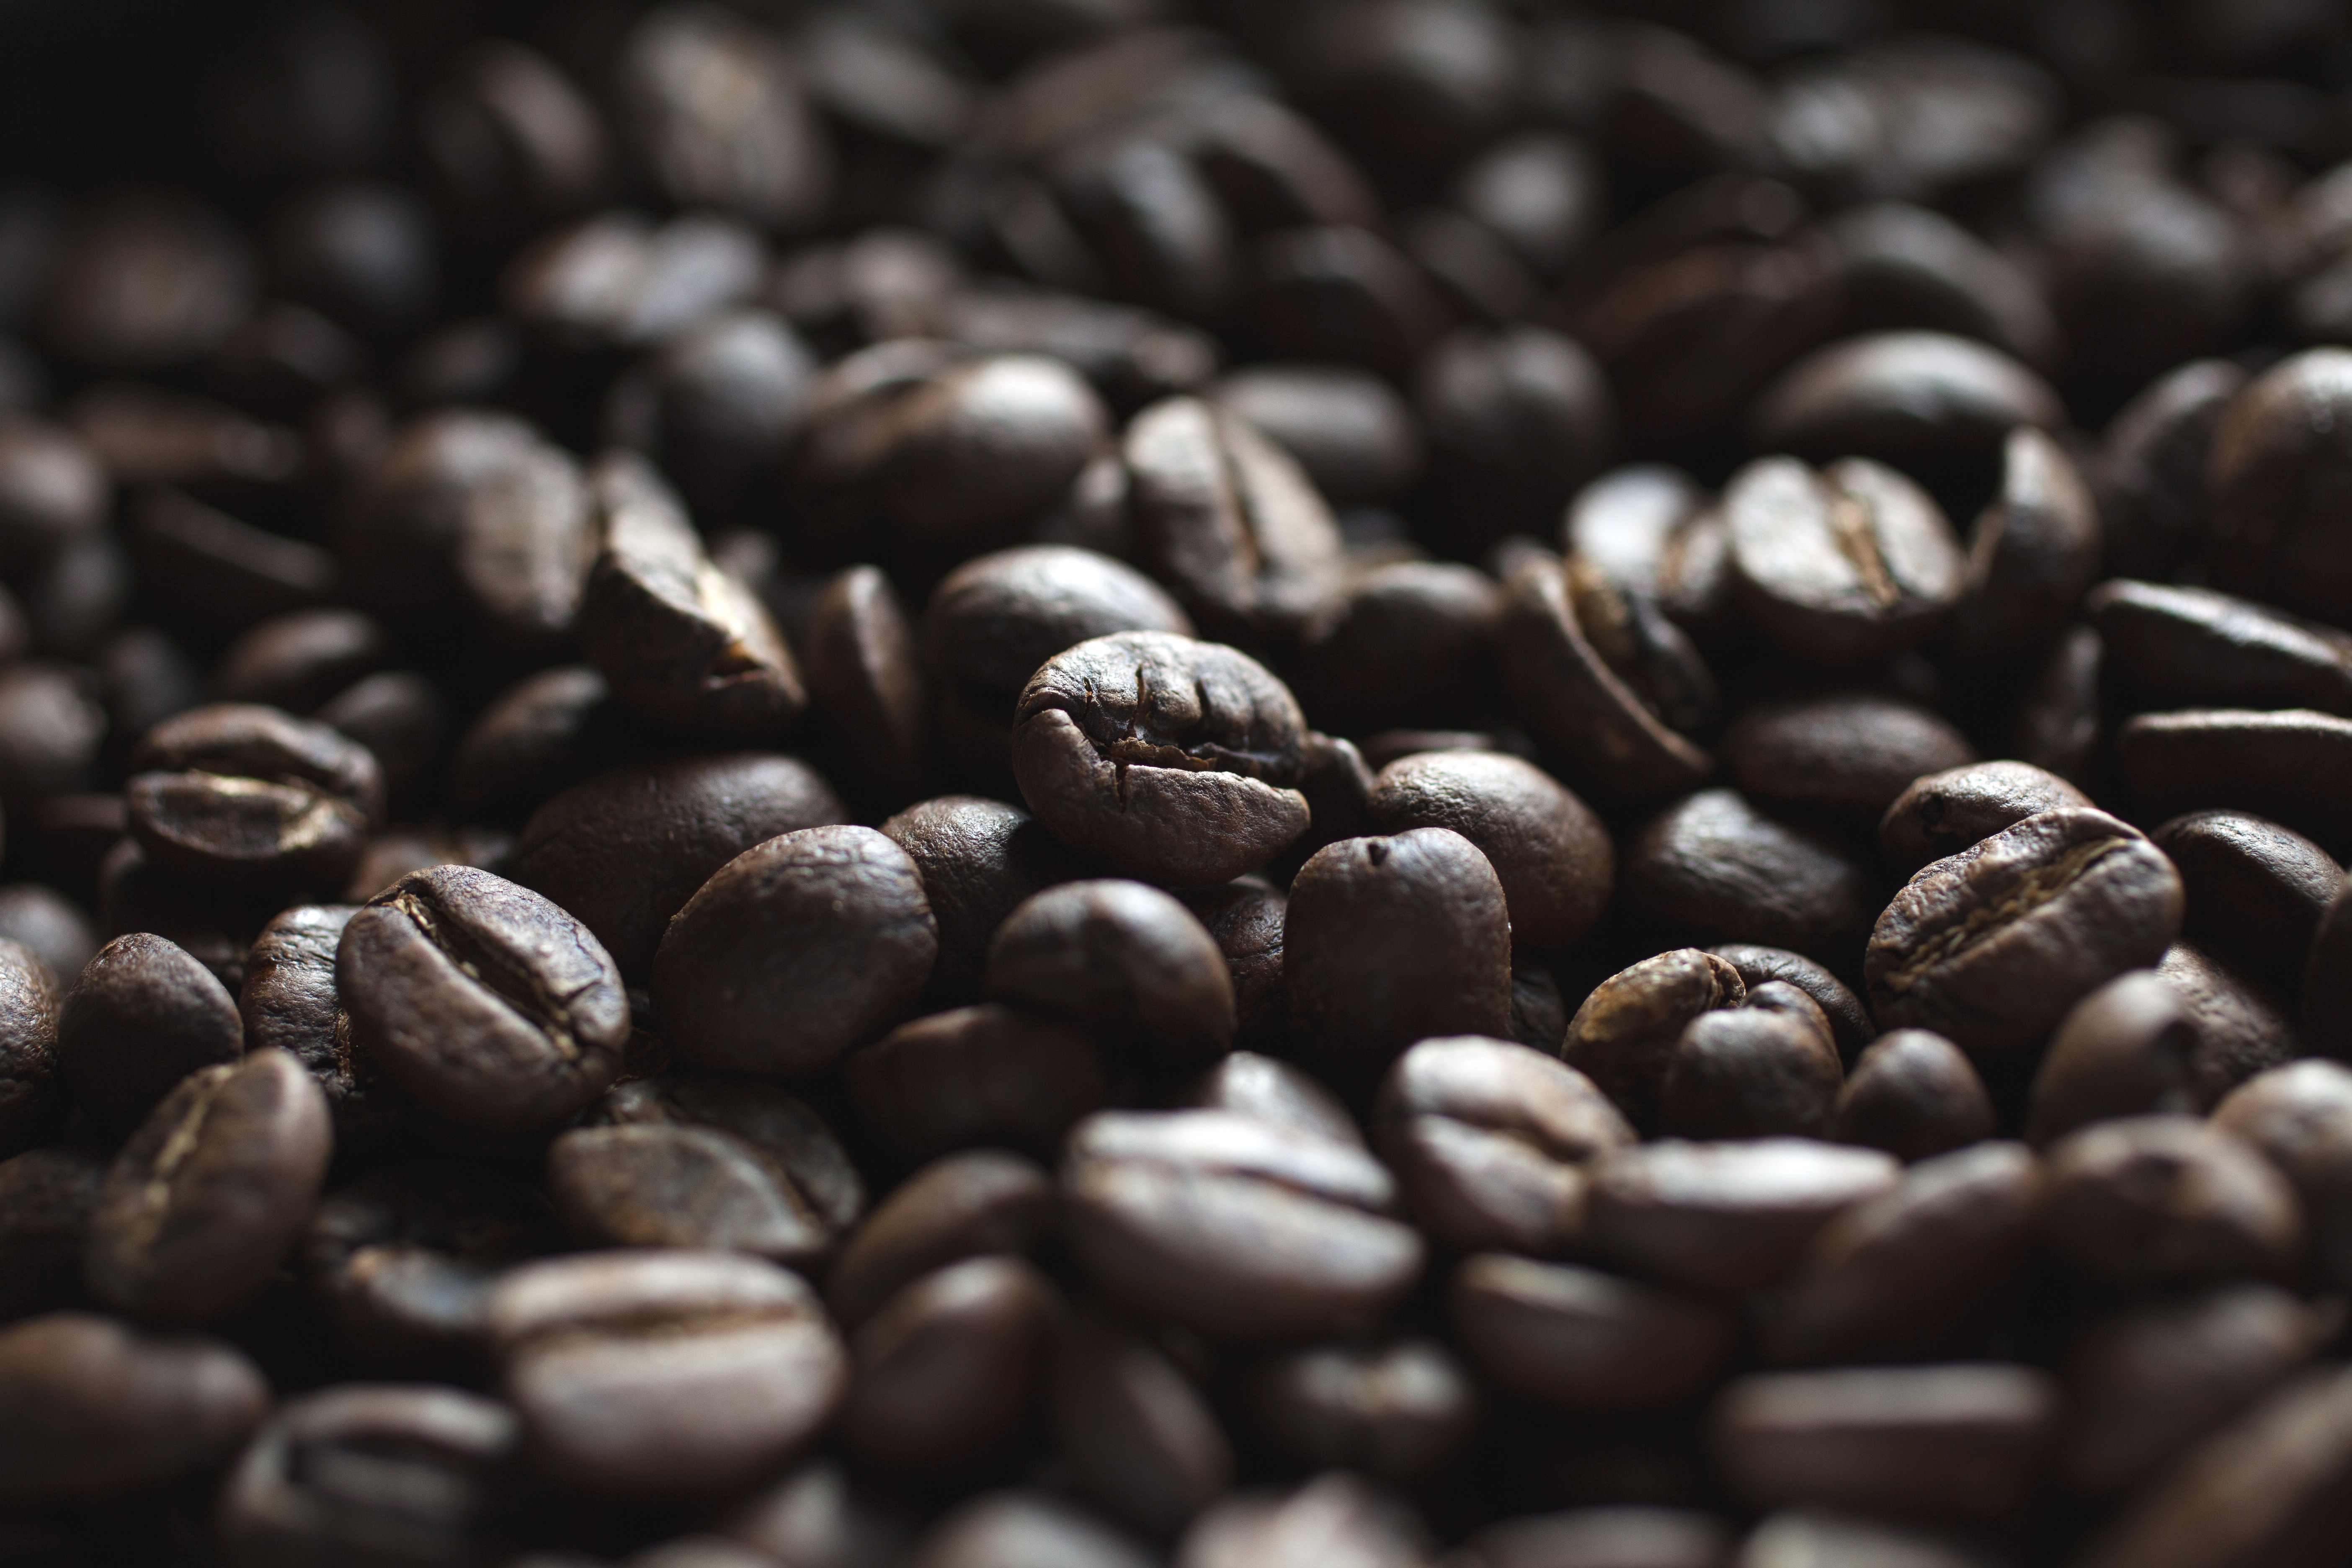 What to Know About Acrylamide, the Chemical in Coffee | Time